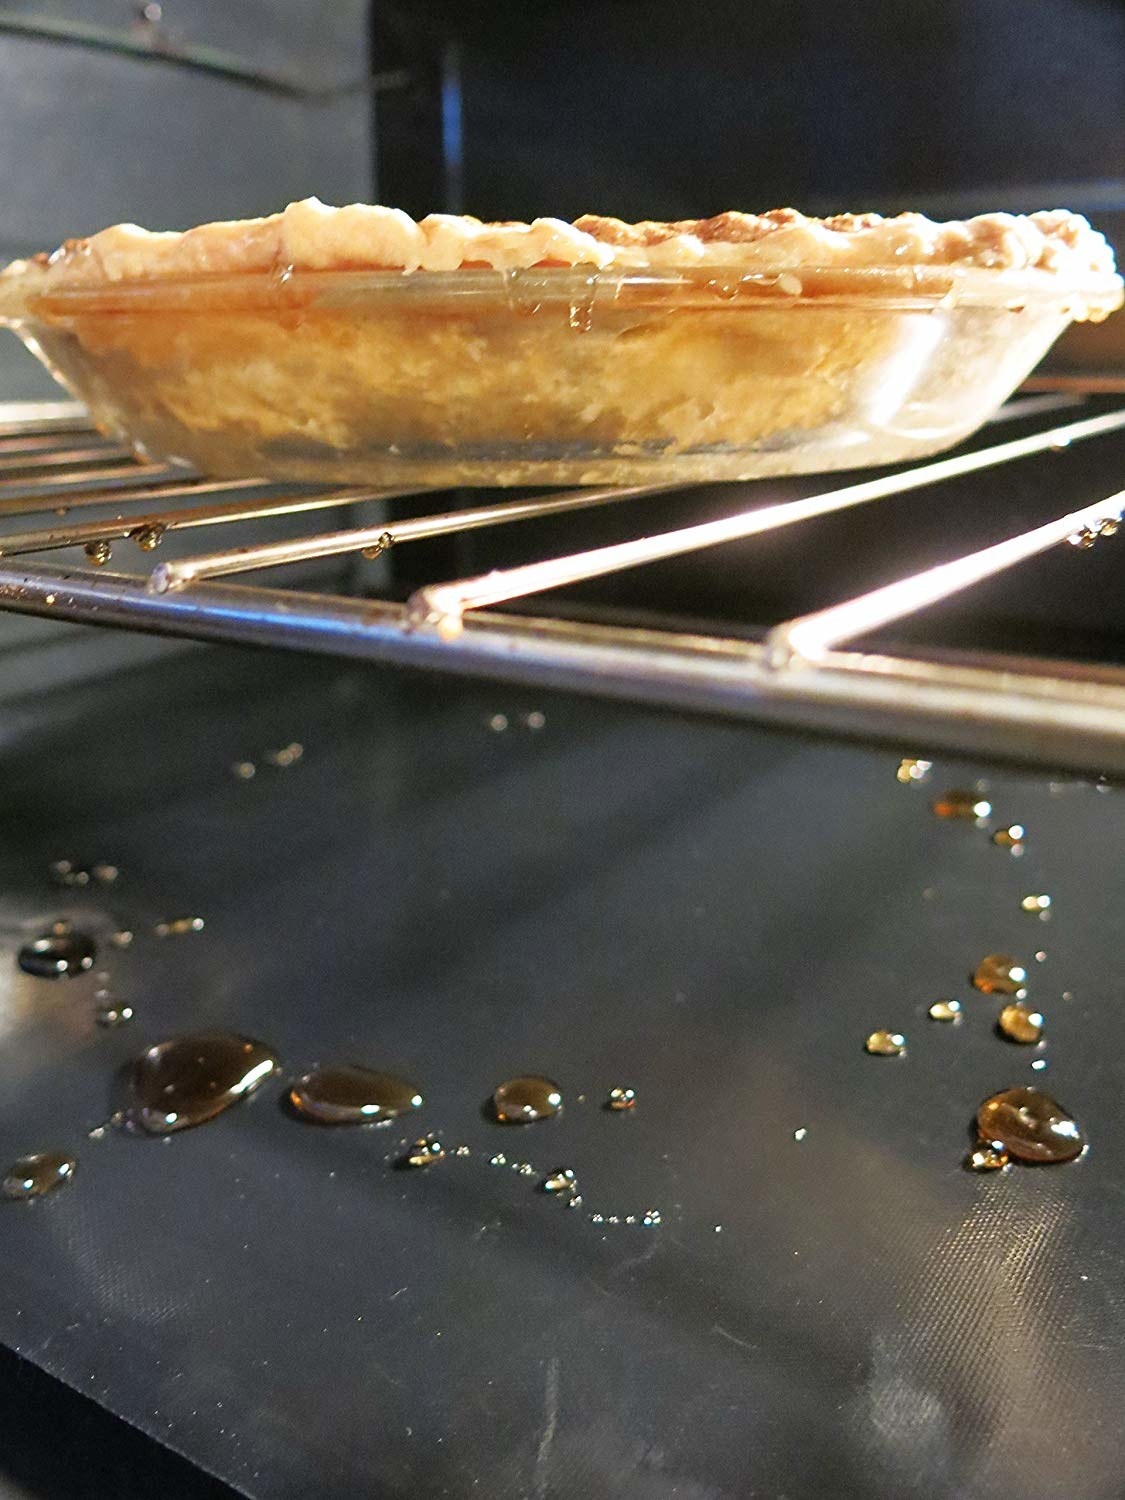 A pie in oven dripping oils onto sleek oven liner 